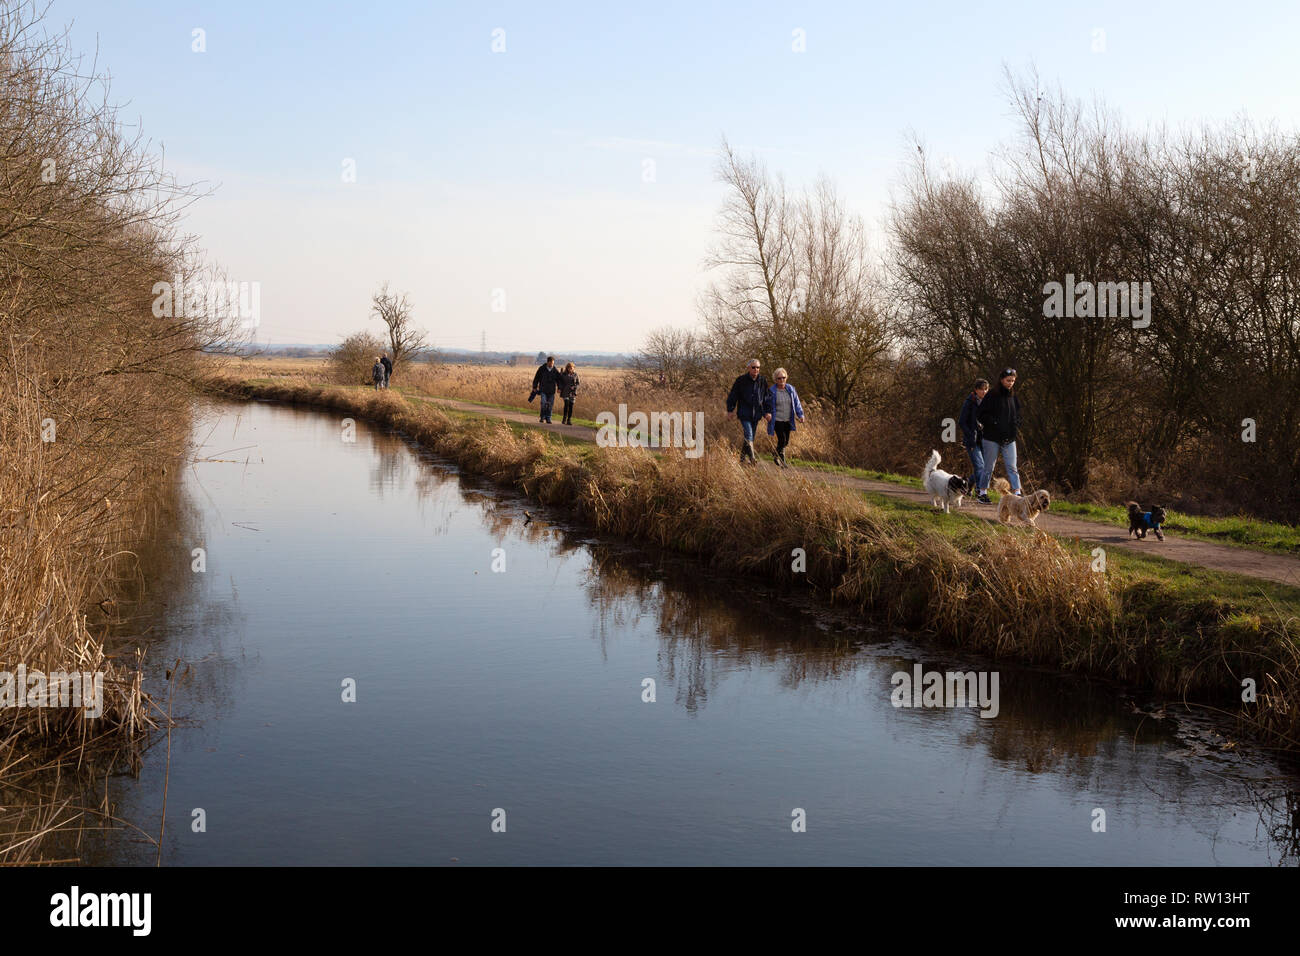 Walkers and dogs walking on a footpath by the fens, Cambridgeshire fenland, East Anglia countryside UK Stock Photo